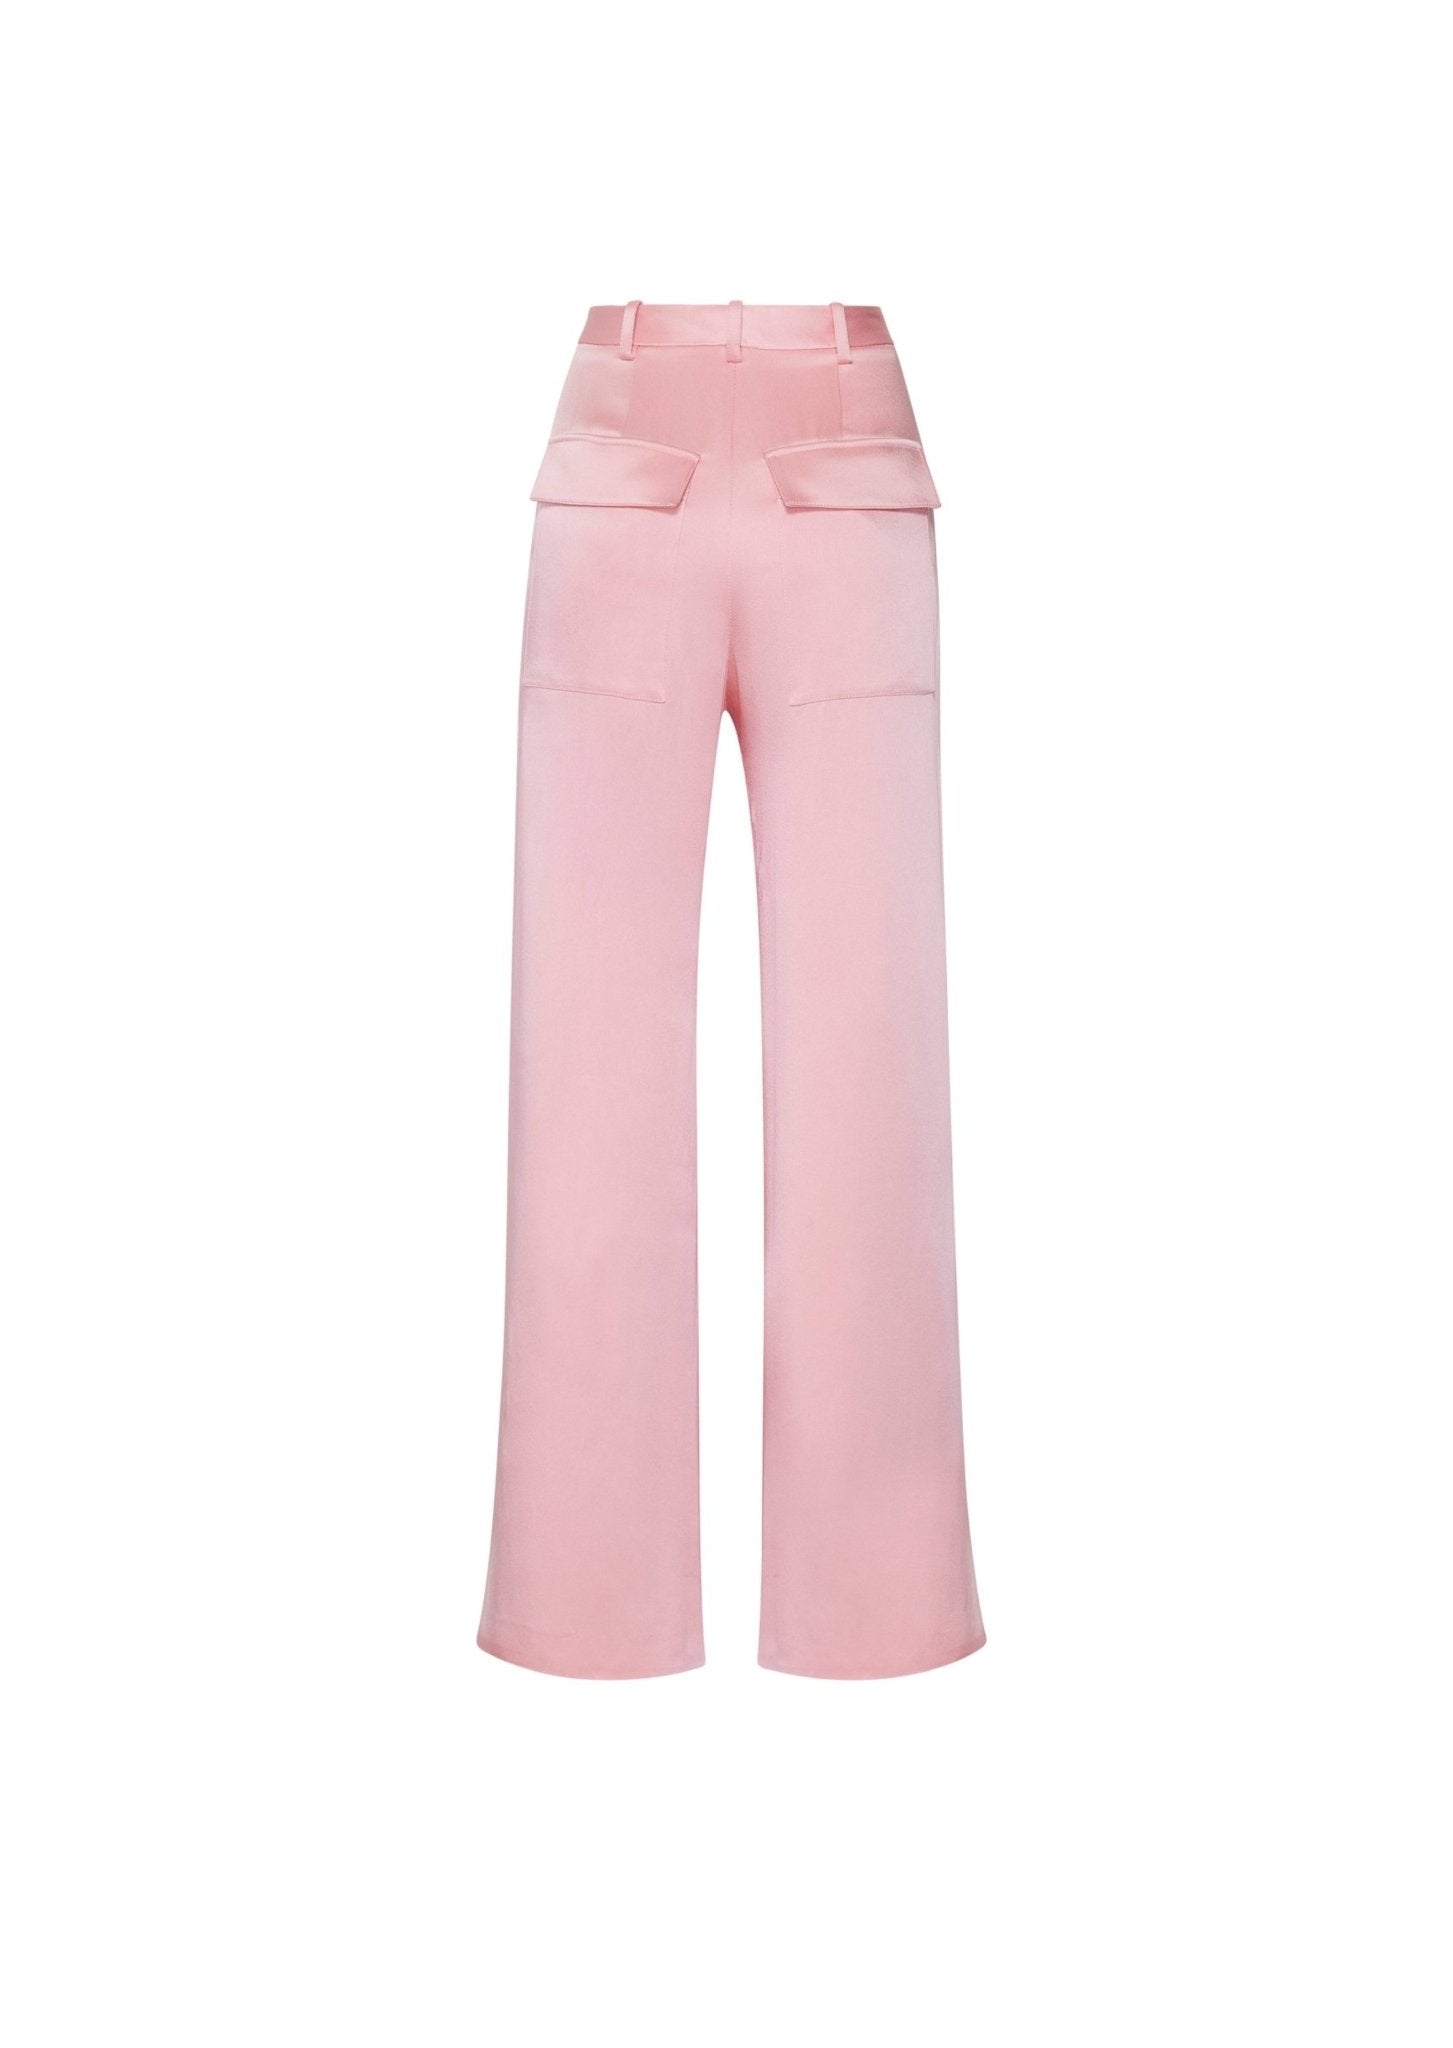 Lapointe X Jonboy Satin Relaxed Pleated Pant in Faded pink | LAPOINTE